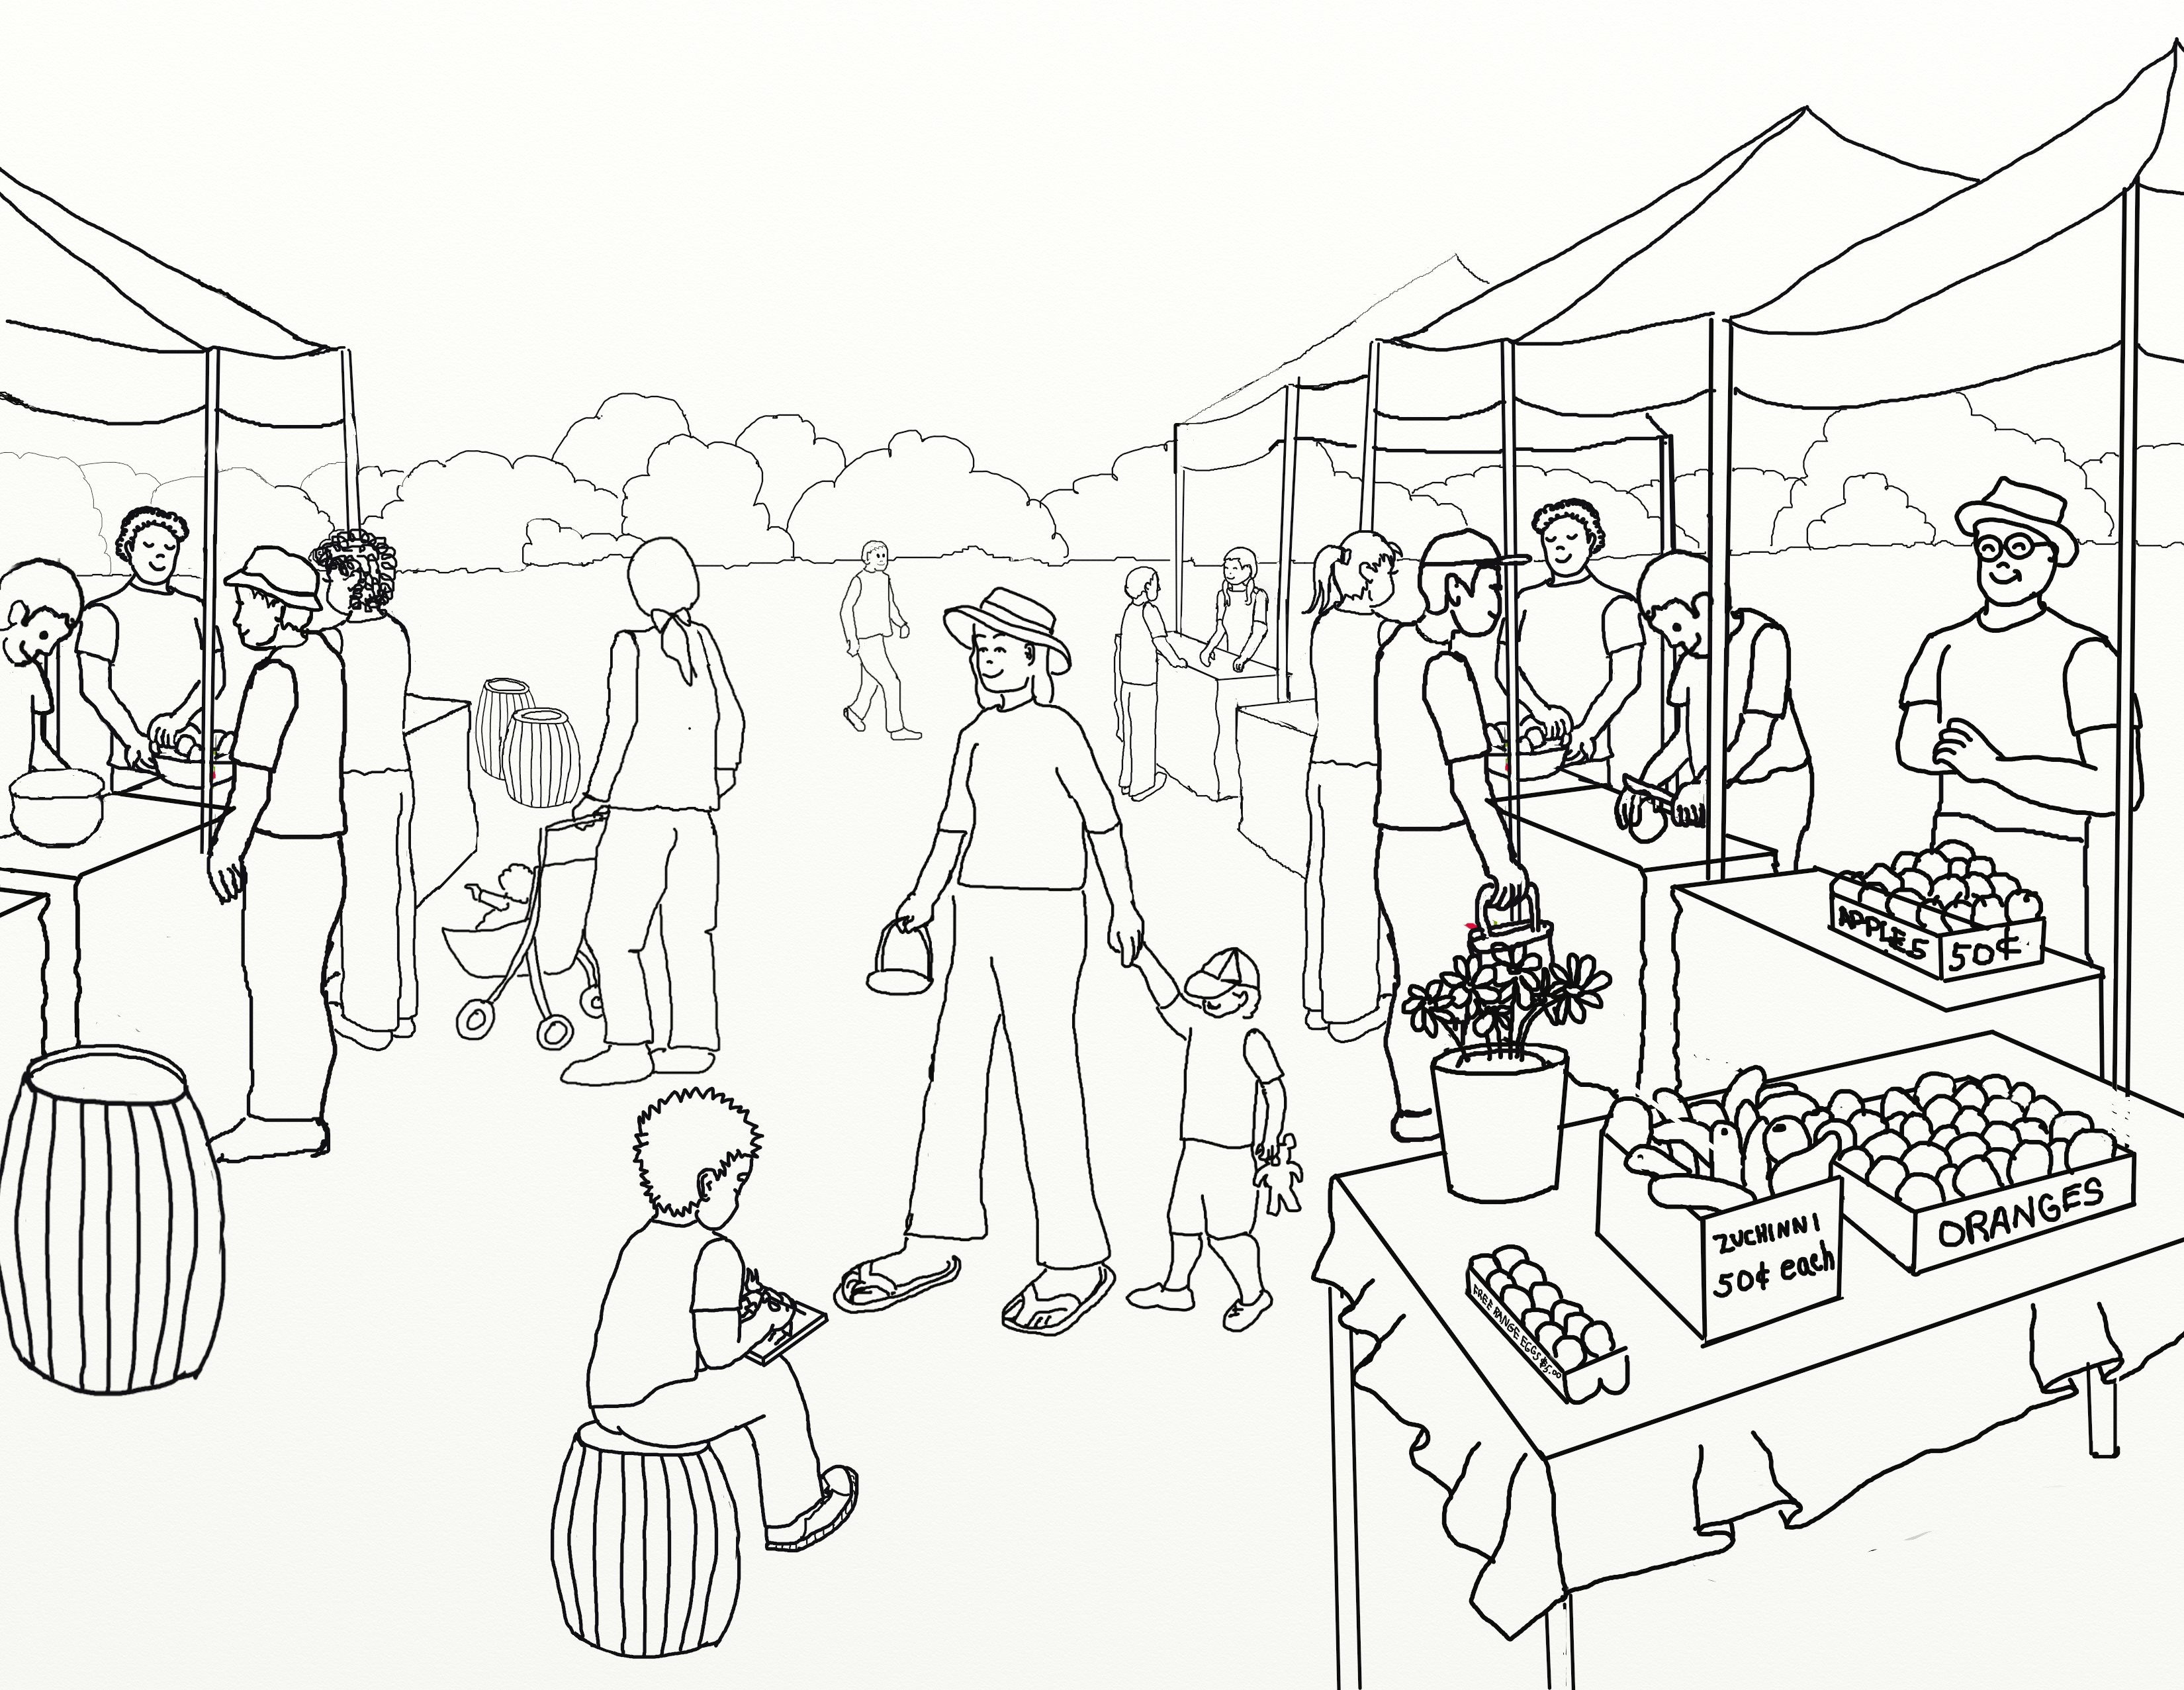 How To Draw A Market Scenery Perspective Guides How To Draw